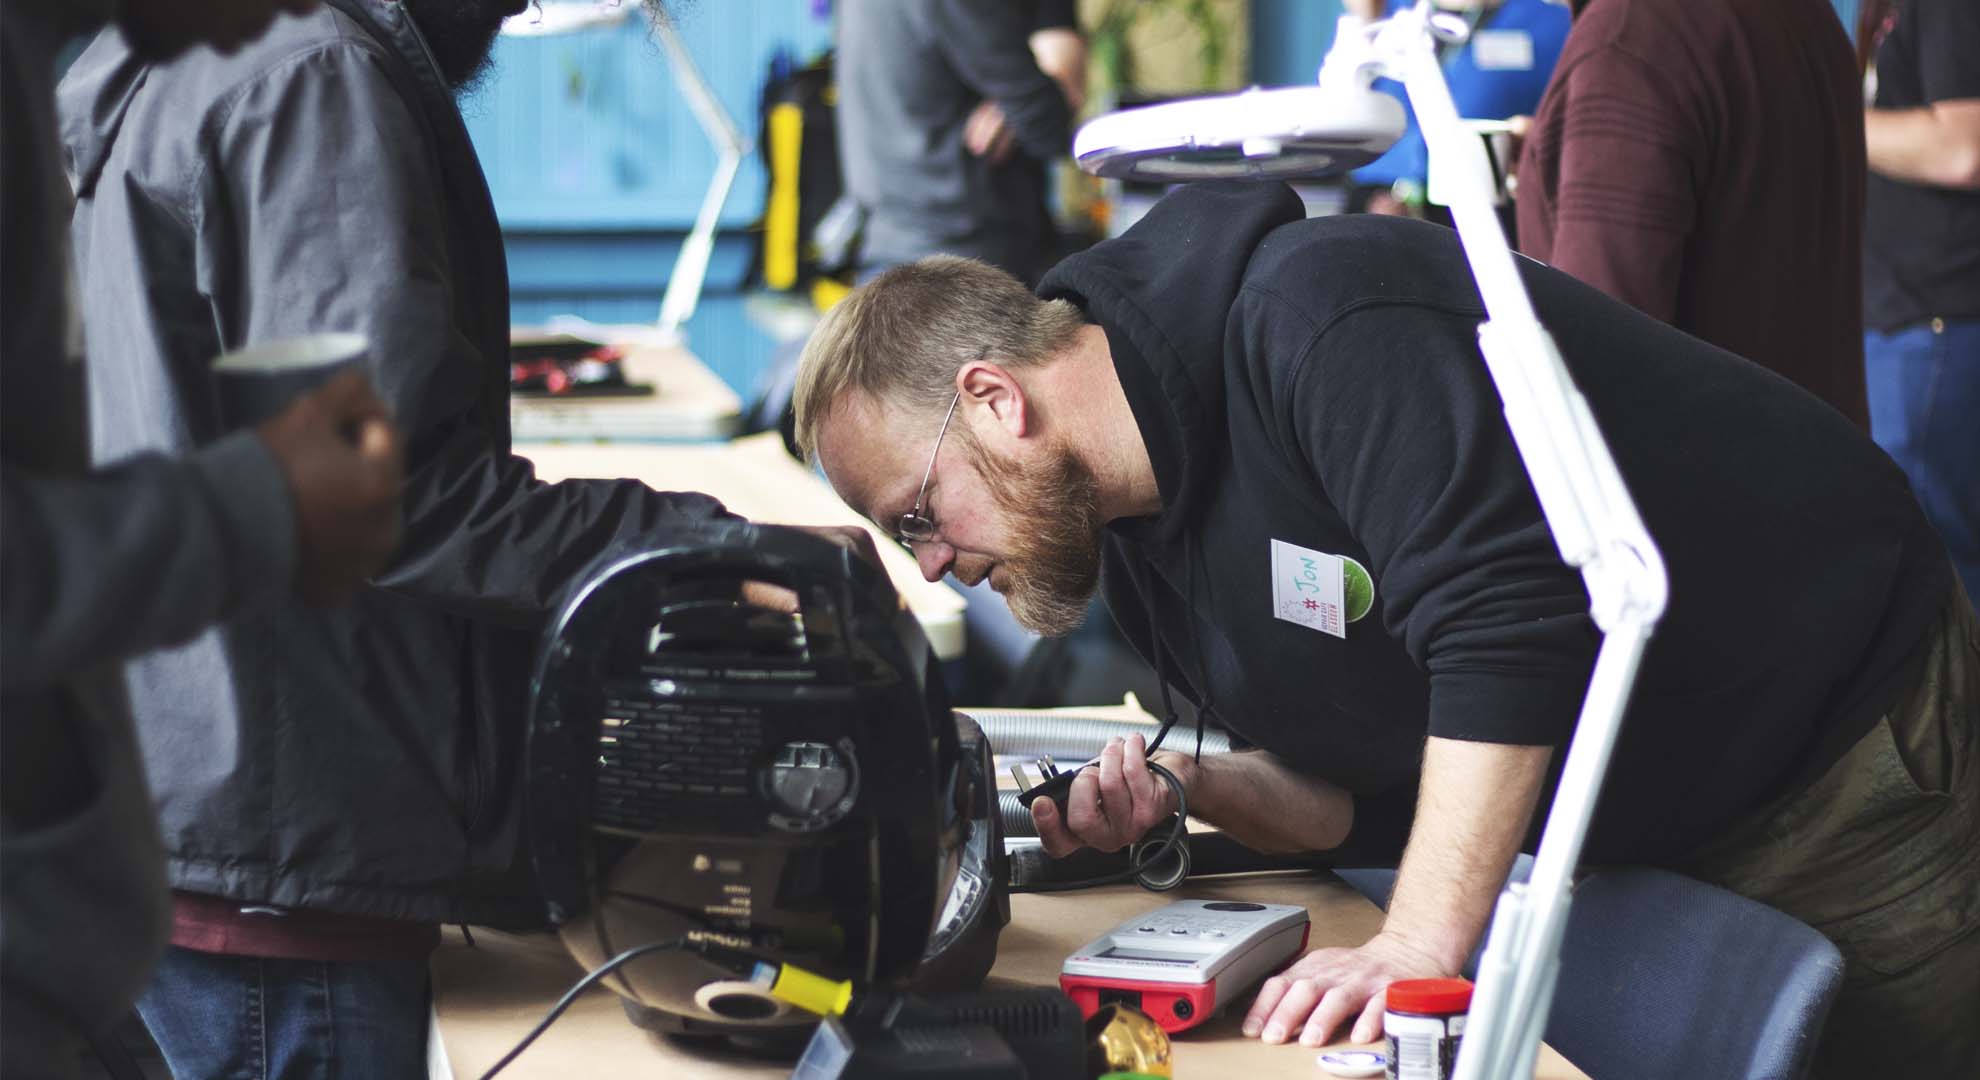 A person working to repair electrical devices at a repair cafe